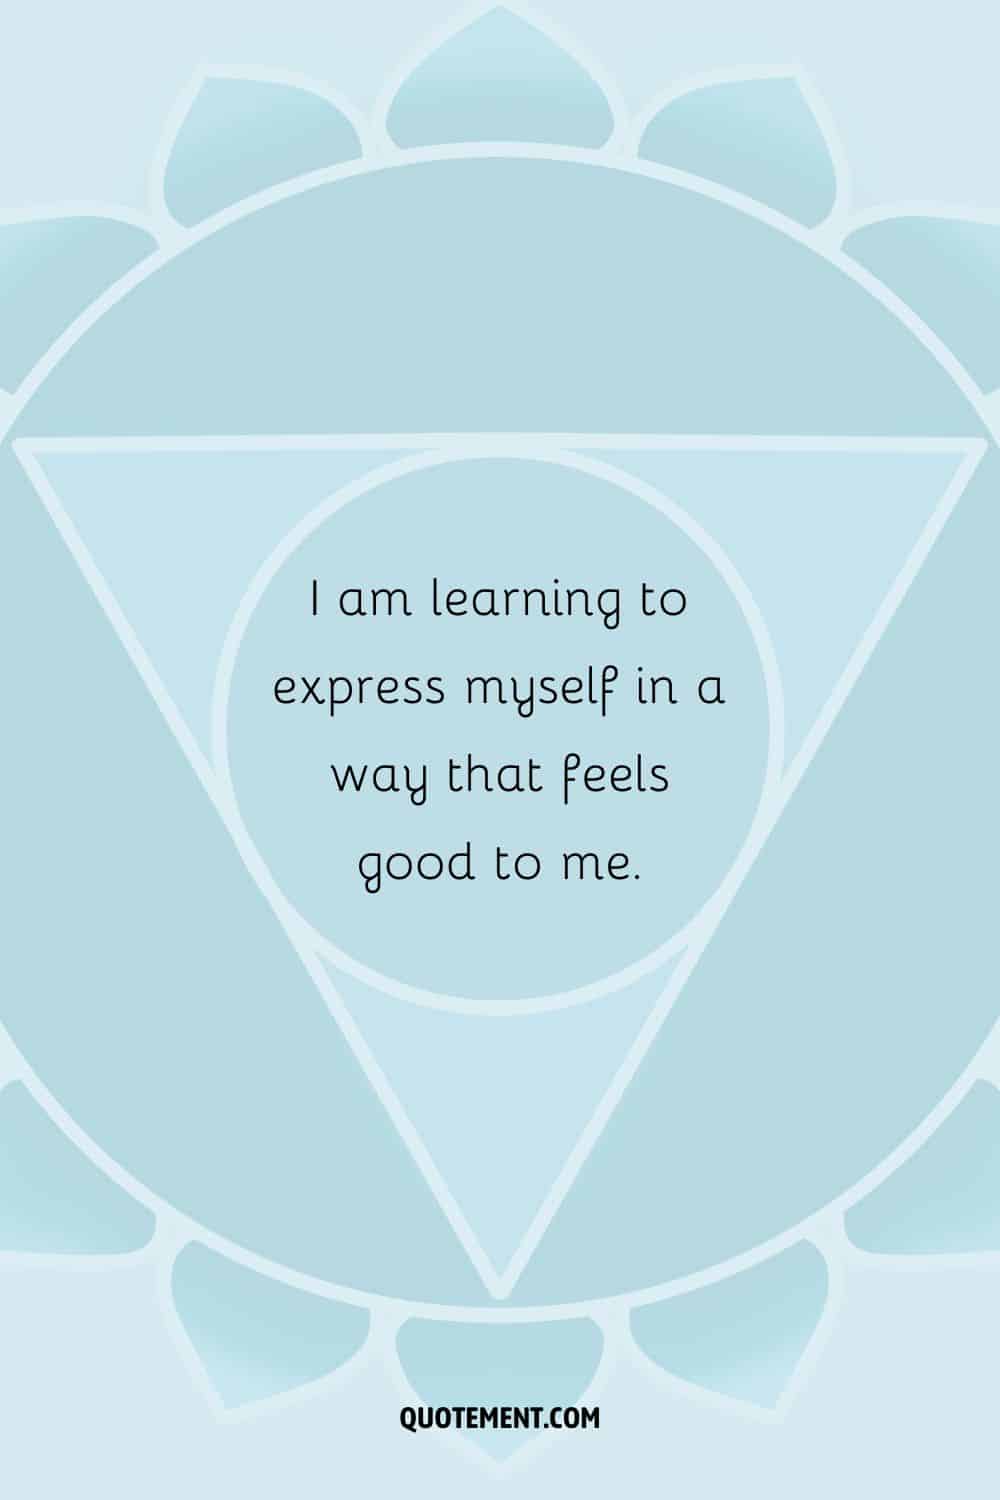 “I am learning to express myself in a way that feels good to me.”